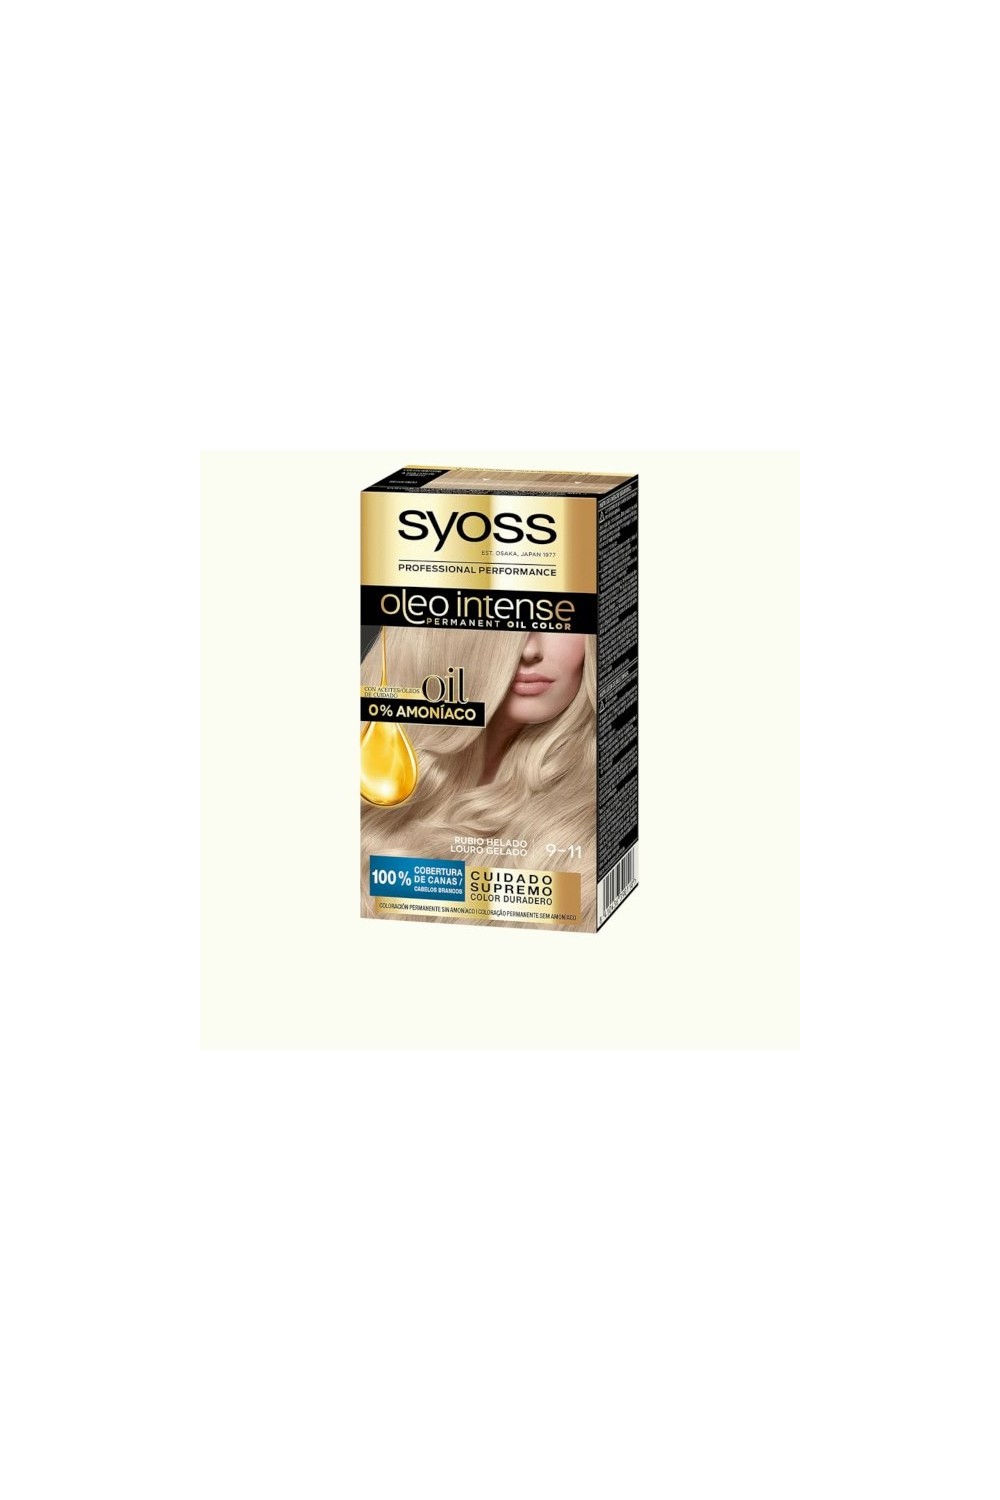 Syoss Oleo Intense Permanent Hair Color 9-11 Icy Blonde